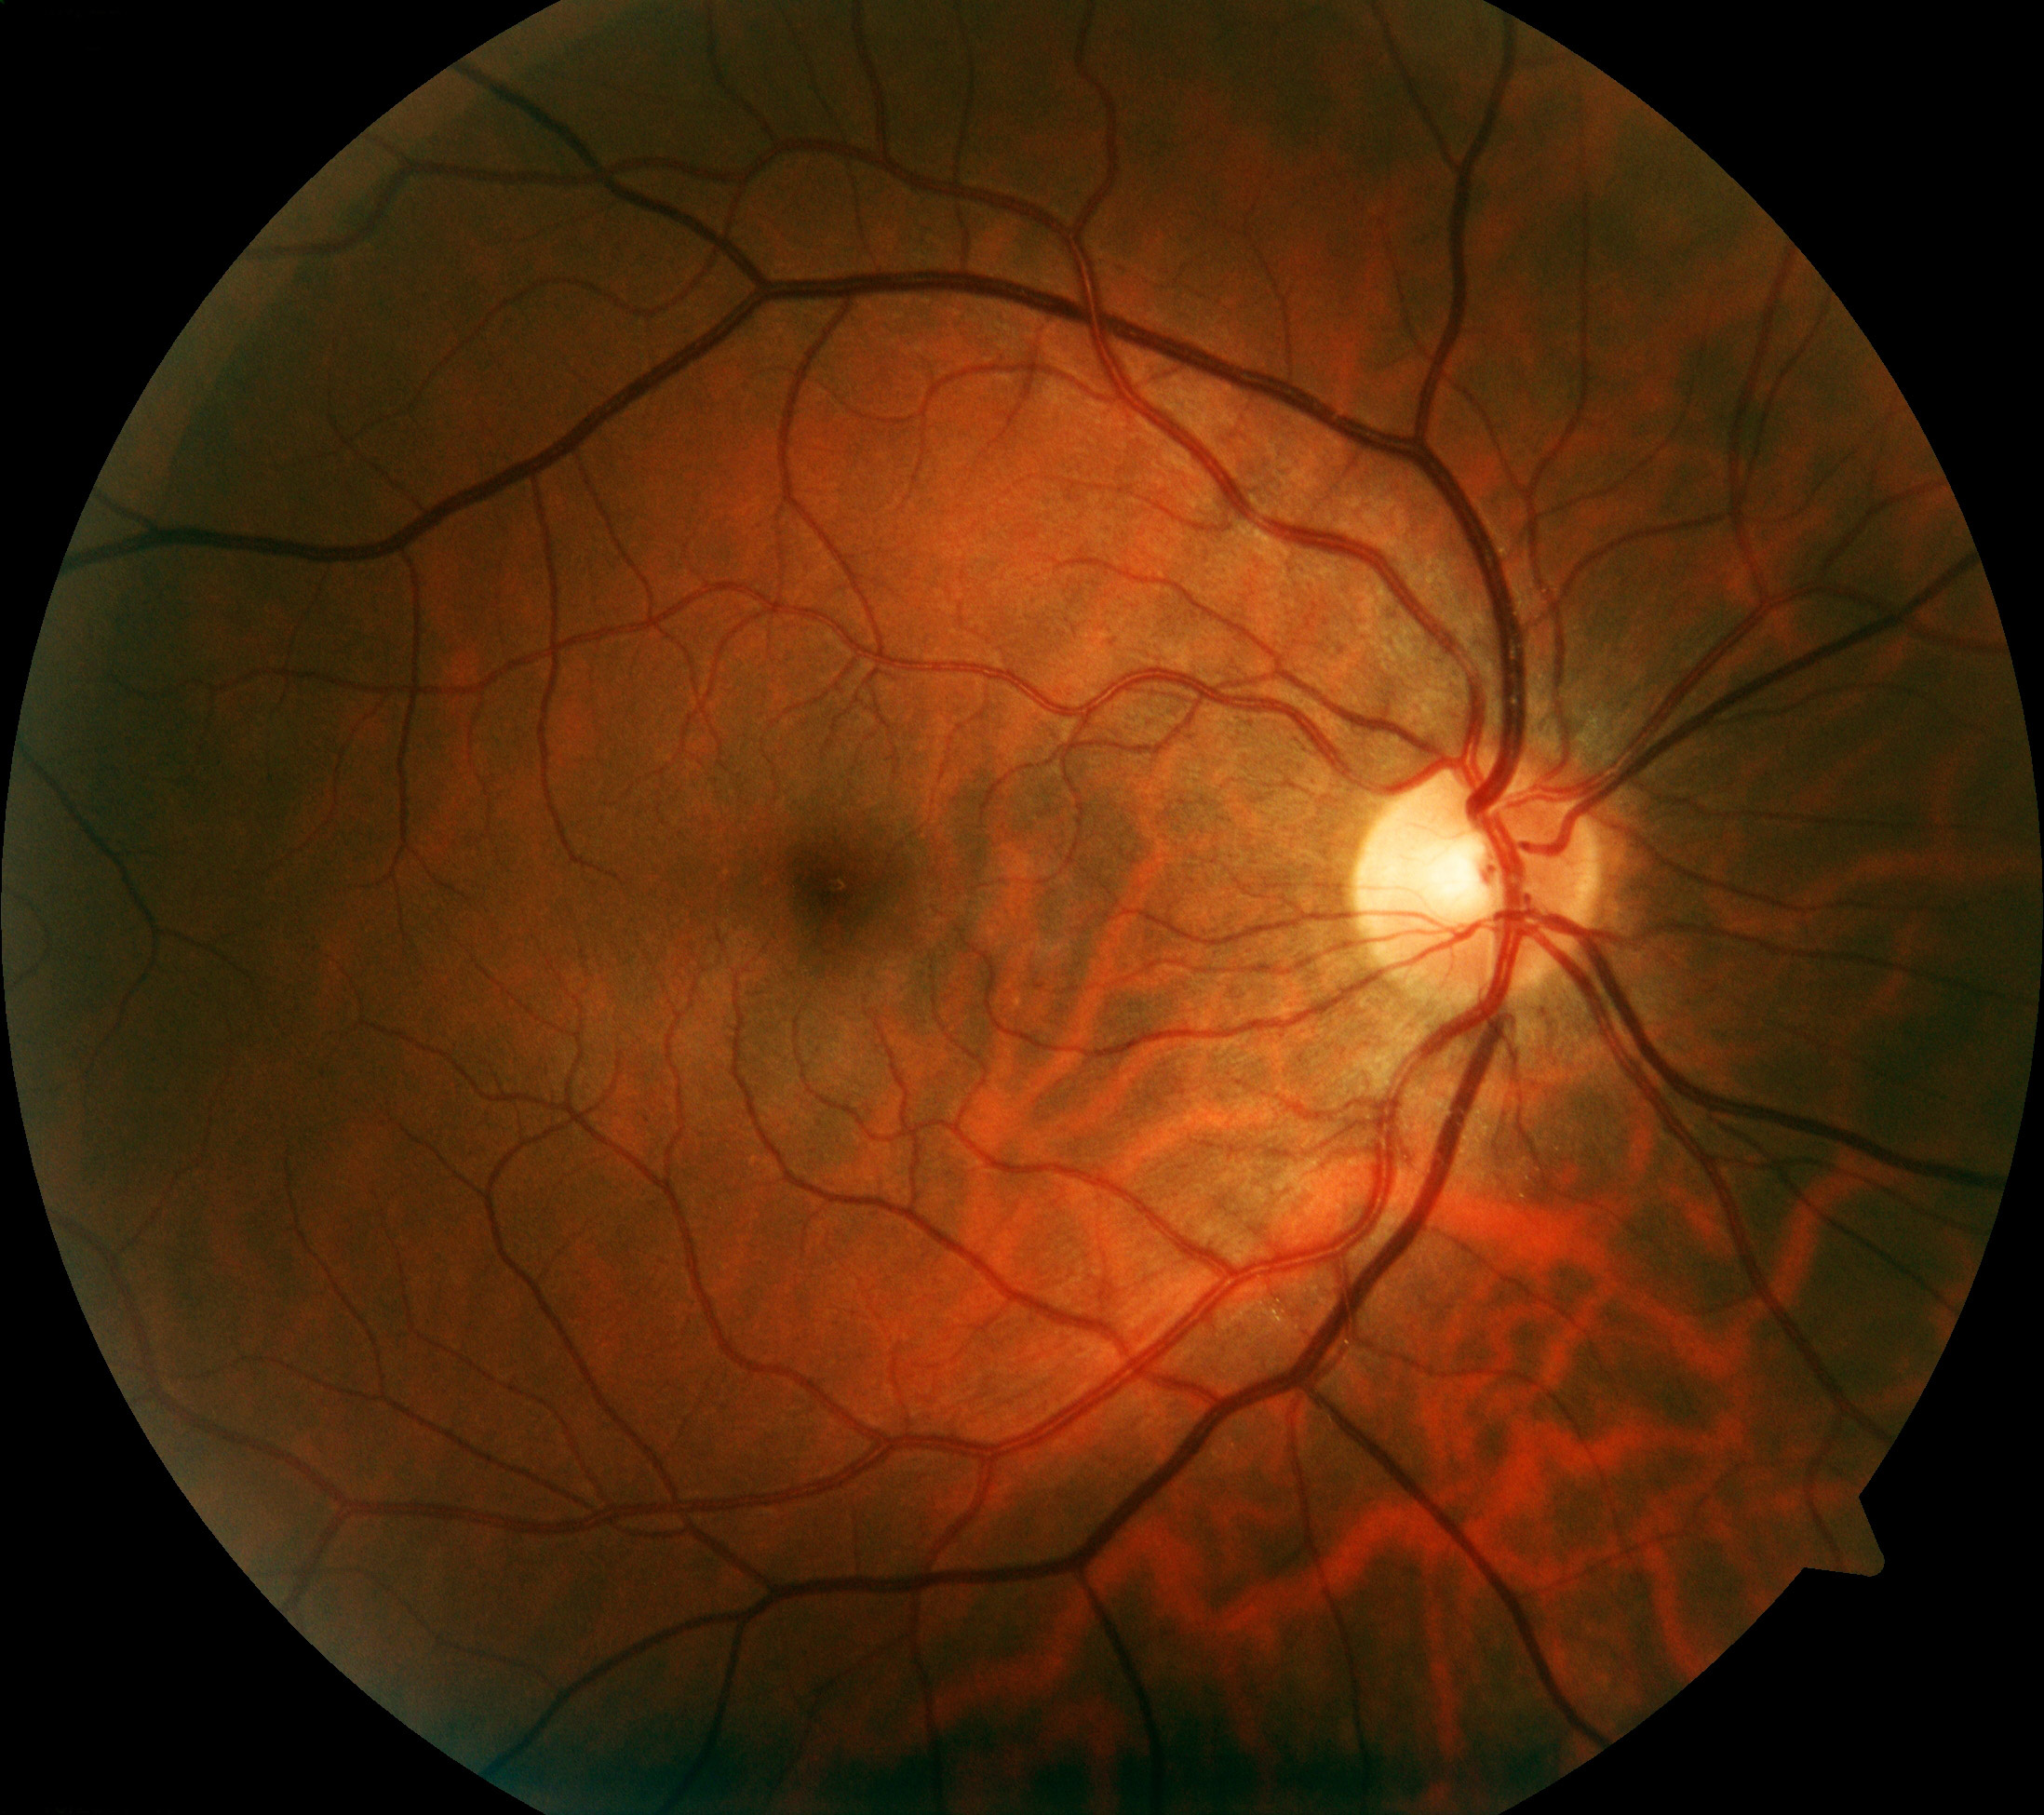 Mending Vision in Patients with Eye Vein Clots